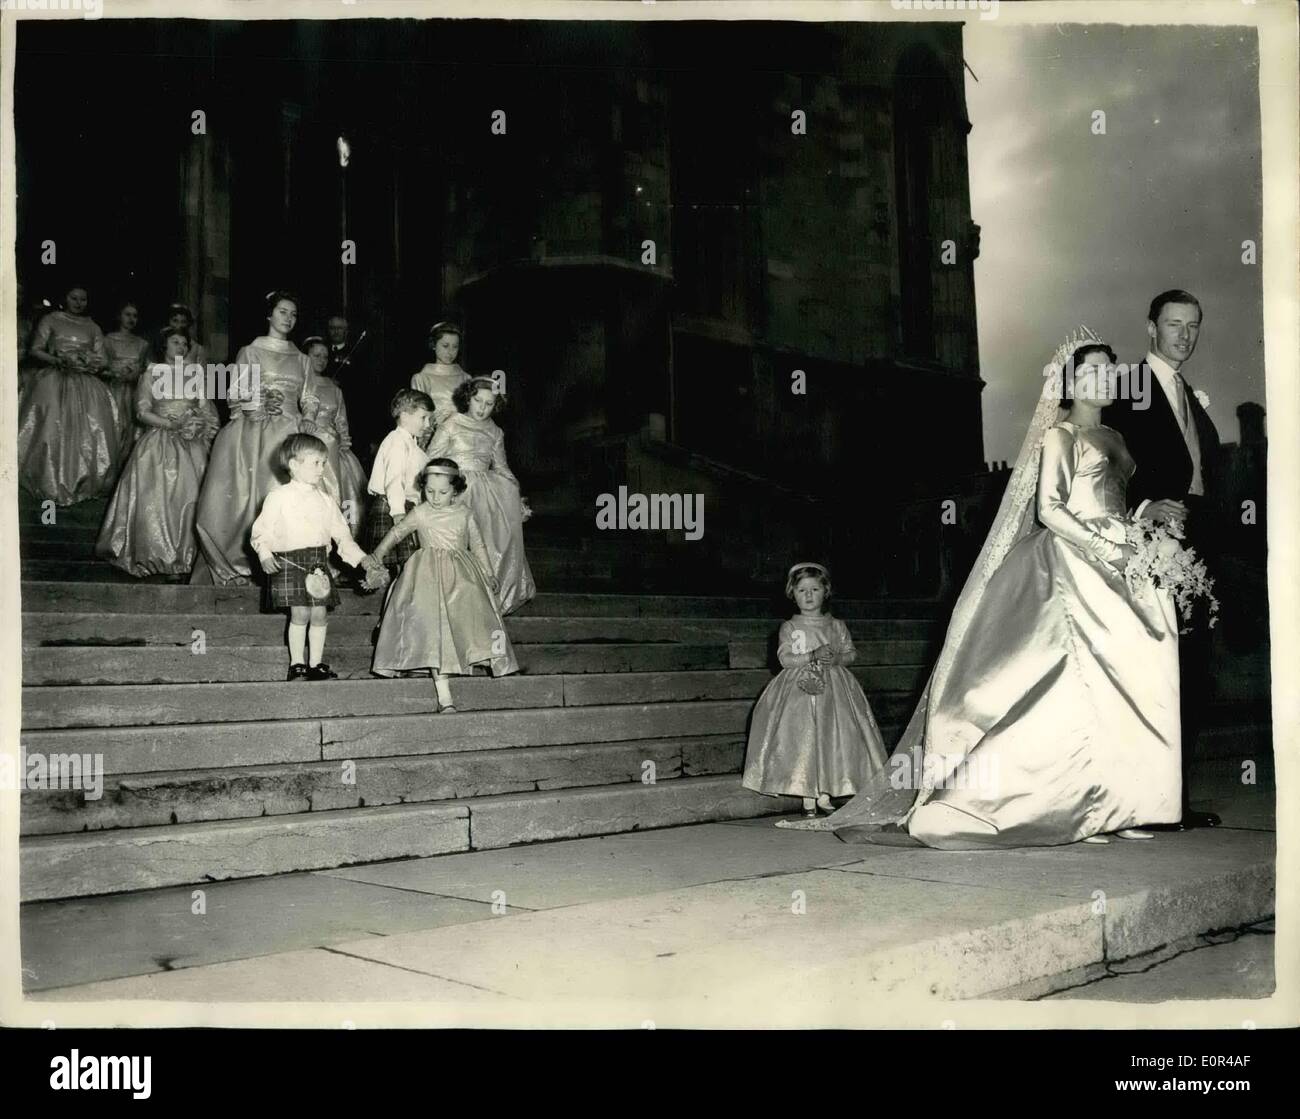 Dec. 12, 1957 - QUEEN'S COUSIN WEDS AT WINDSOR BRIDE AND BRIDEGROOM AFTER CERMONY The Wedding took place this afternoon at St. George's Chapel, Windsor of Miss Abel-Smith Cousin of the Queen - to Mr. David Liddell-Grainger..Princess Bestrix - Princess Trene of the Netherlands and Princess CHristina of Sweden were among the bridesmaids. KEYSTONE PHOTO SHOWS:- The Bride and Bridegroom with their attendants - including the Princess - leave the Capital after the wedding at Windepr this after noon. Stock Photo